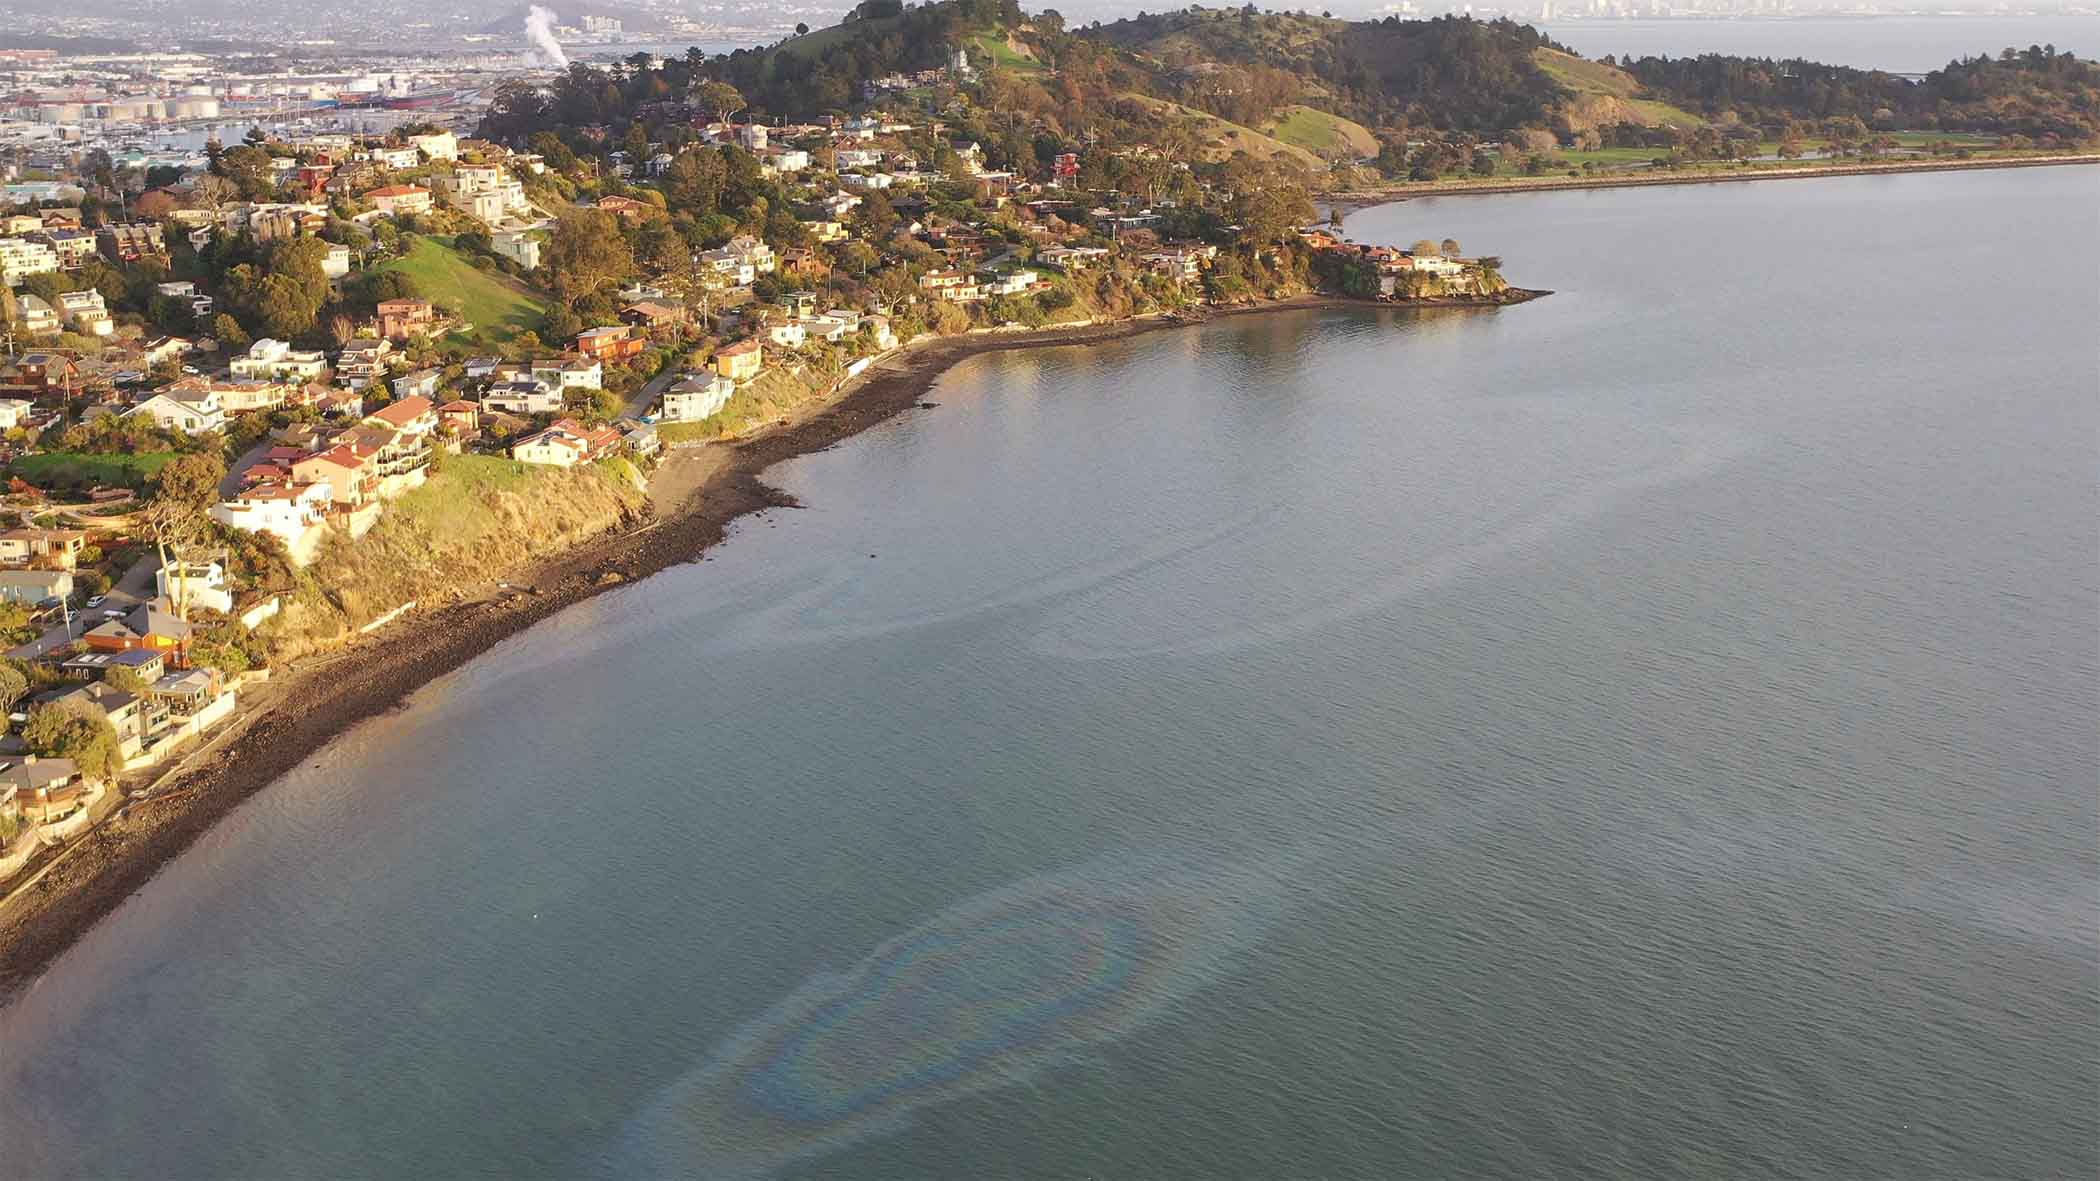 New Chevron Oil Spill Report Doesn’t Pass the Smell Test